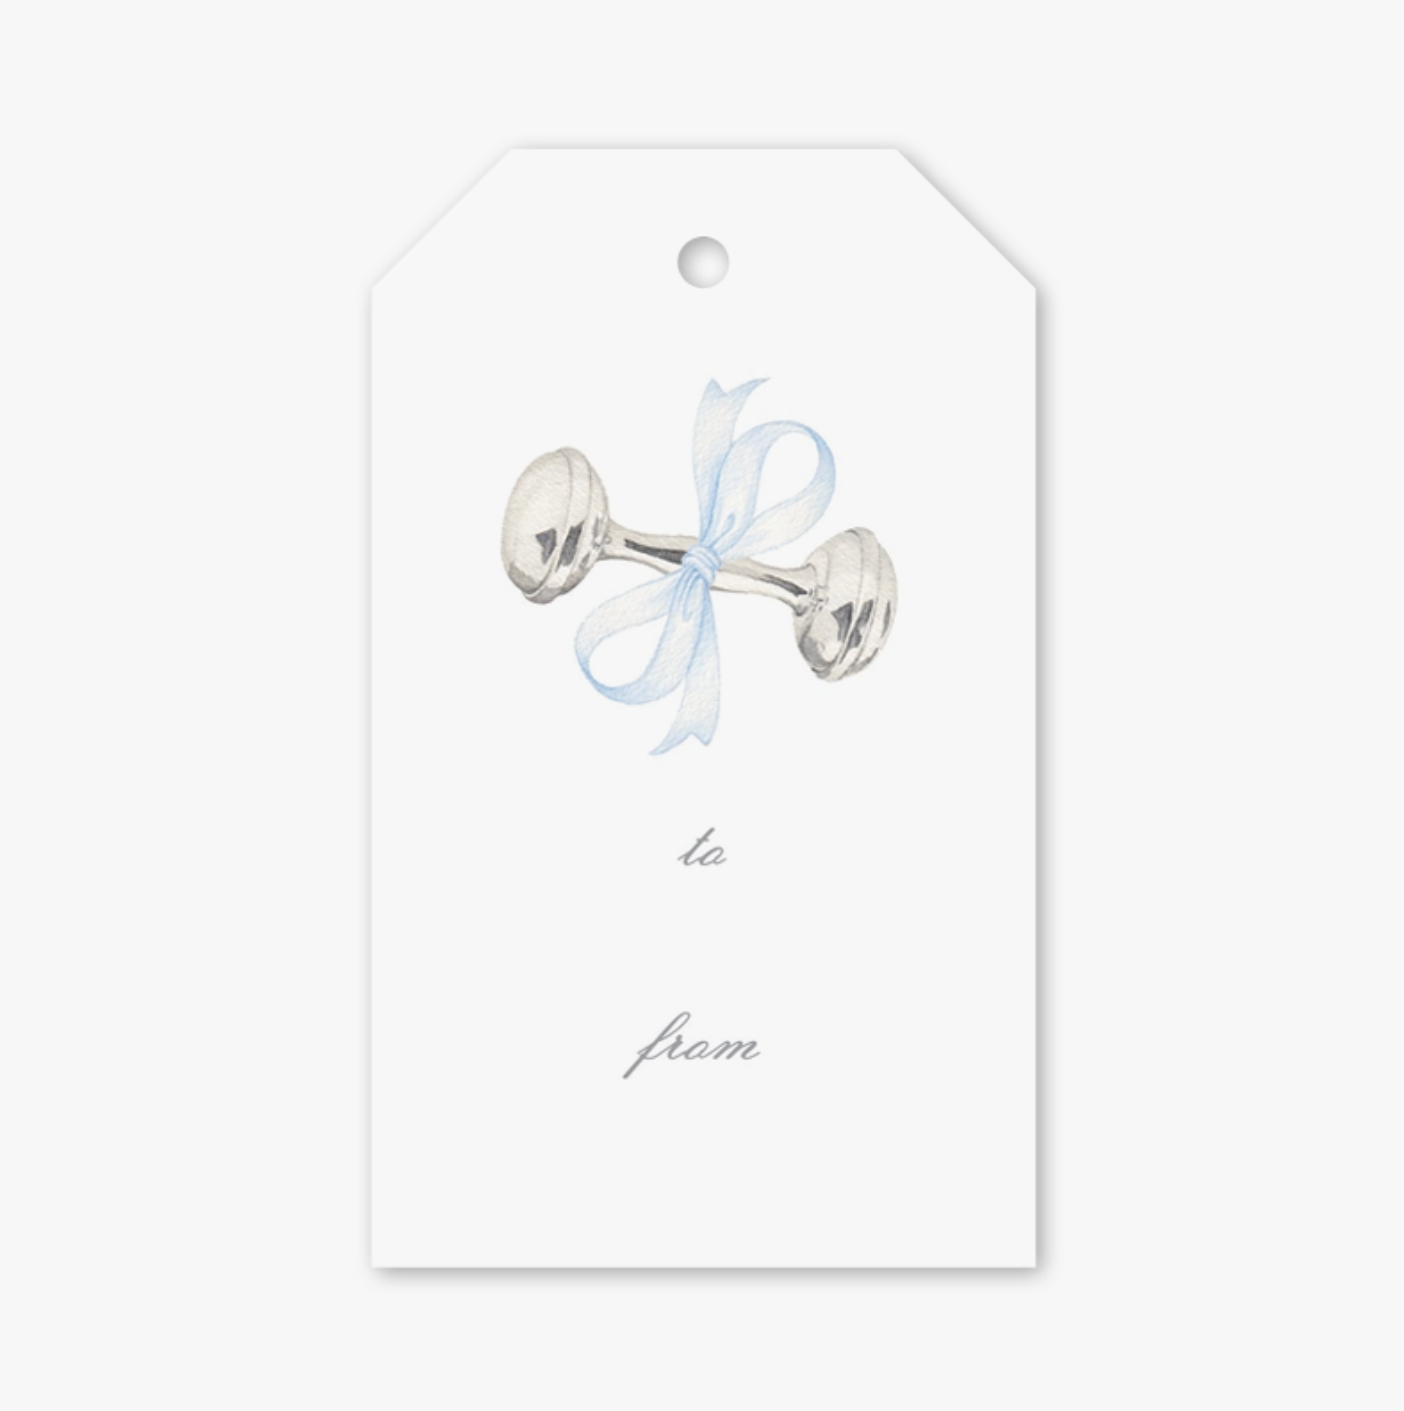 Rattle and Bow Blue Gift Tags